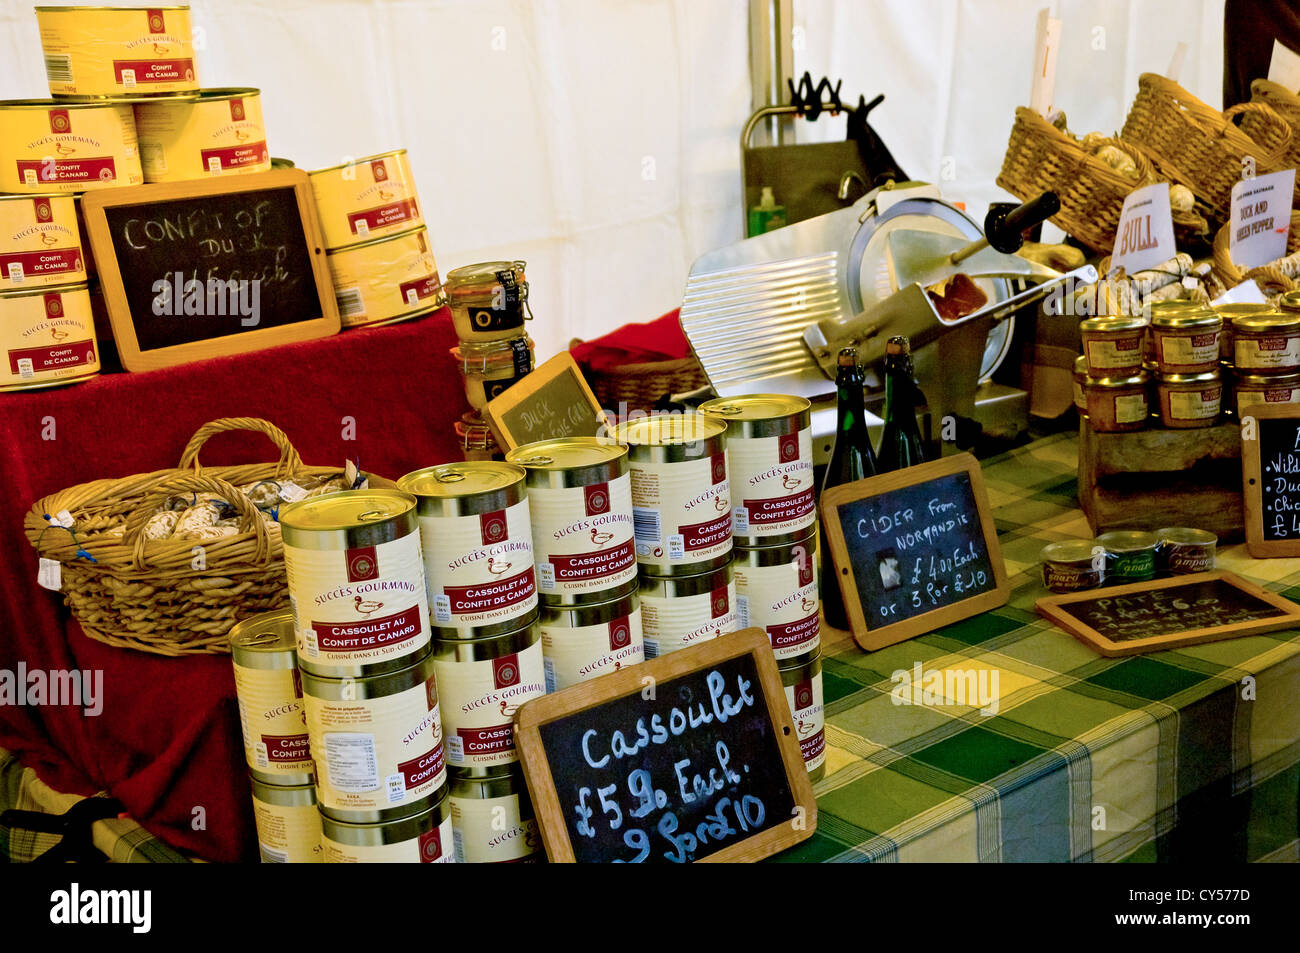 Tins of cassoulet food for sale on continental market stall York North Yorkshire England UK United Kingdom GB Great Britain Stock Photo